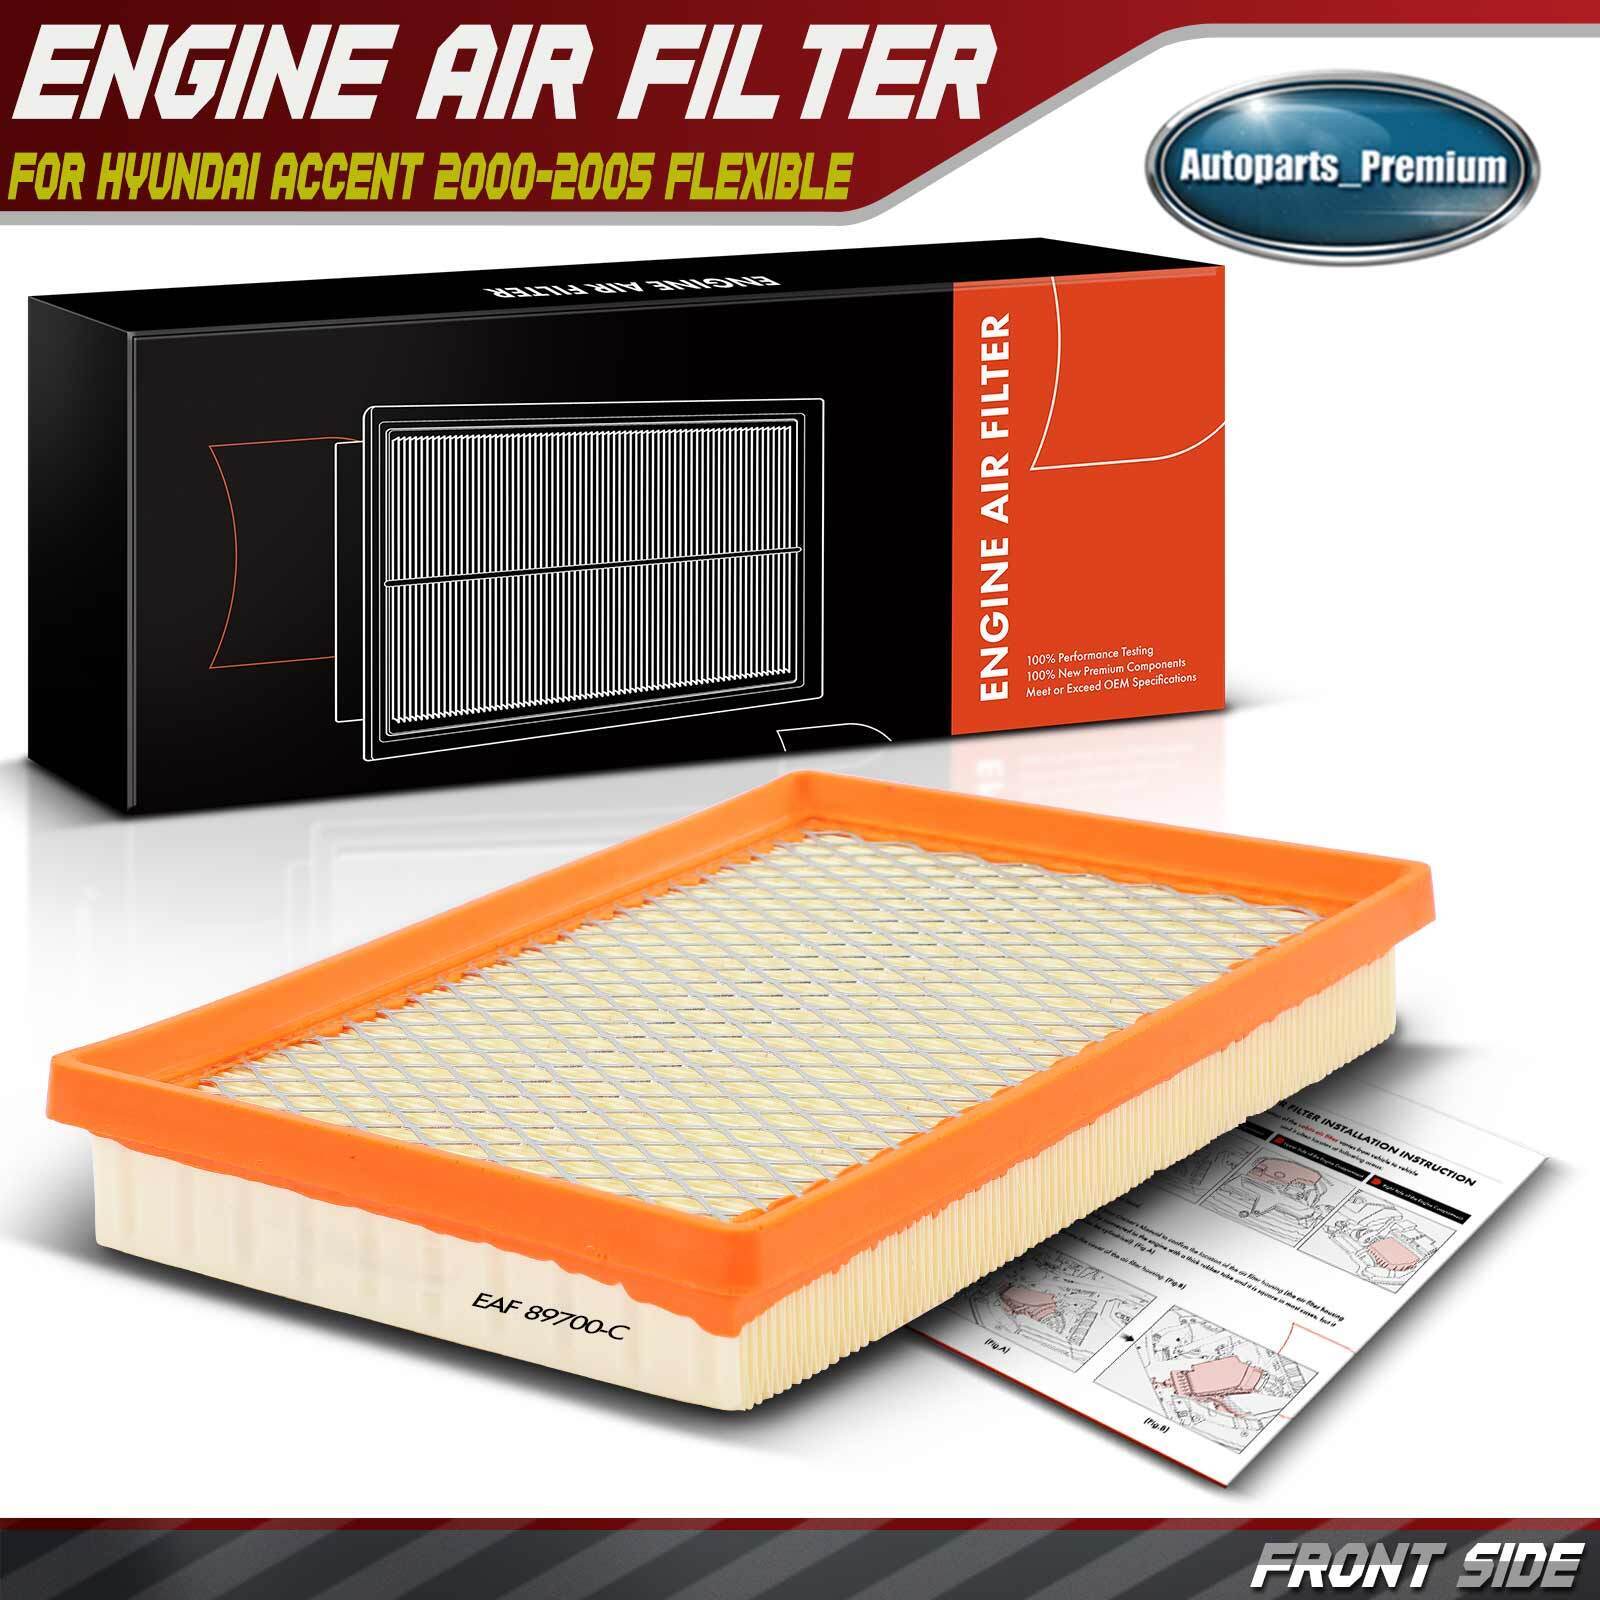 1x New Engine Air Filter for Hyundai Accent 2000-2005 2811322600 0100009 0421633